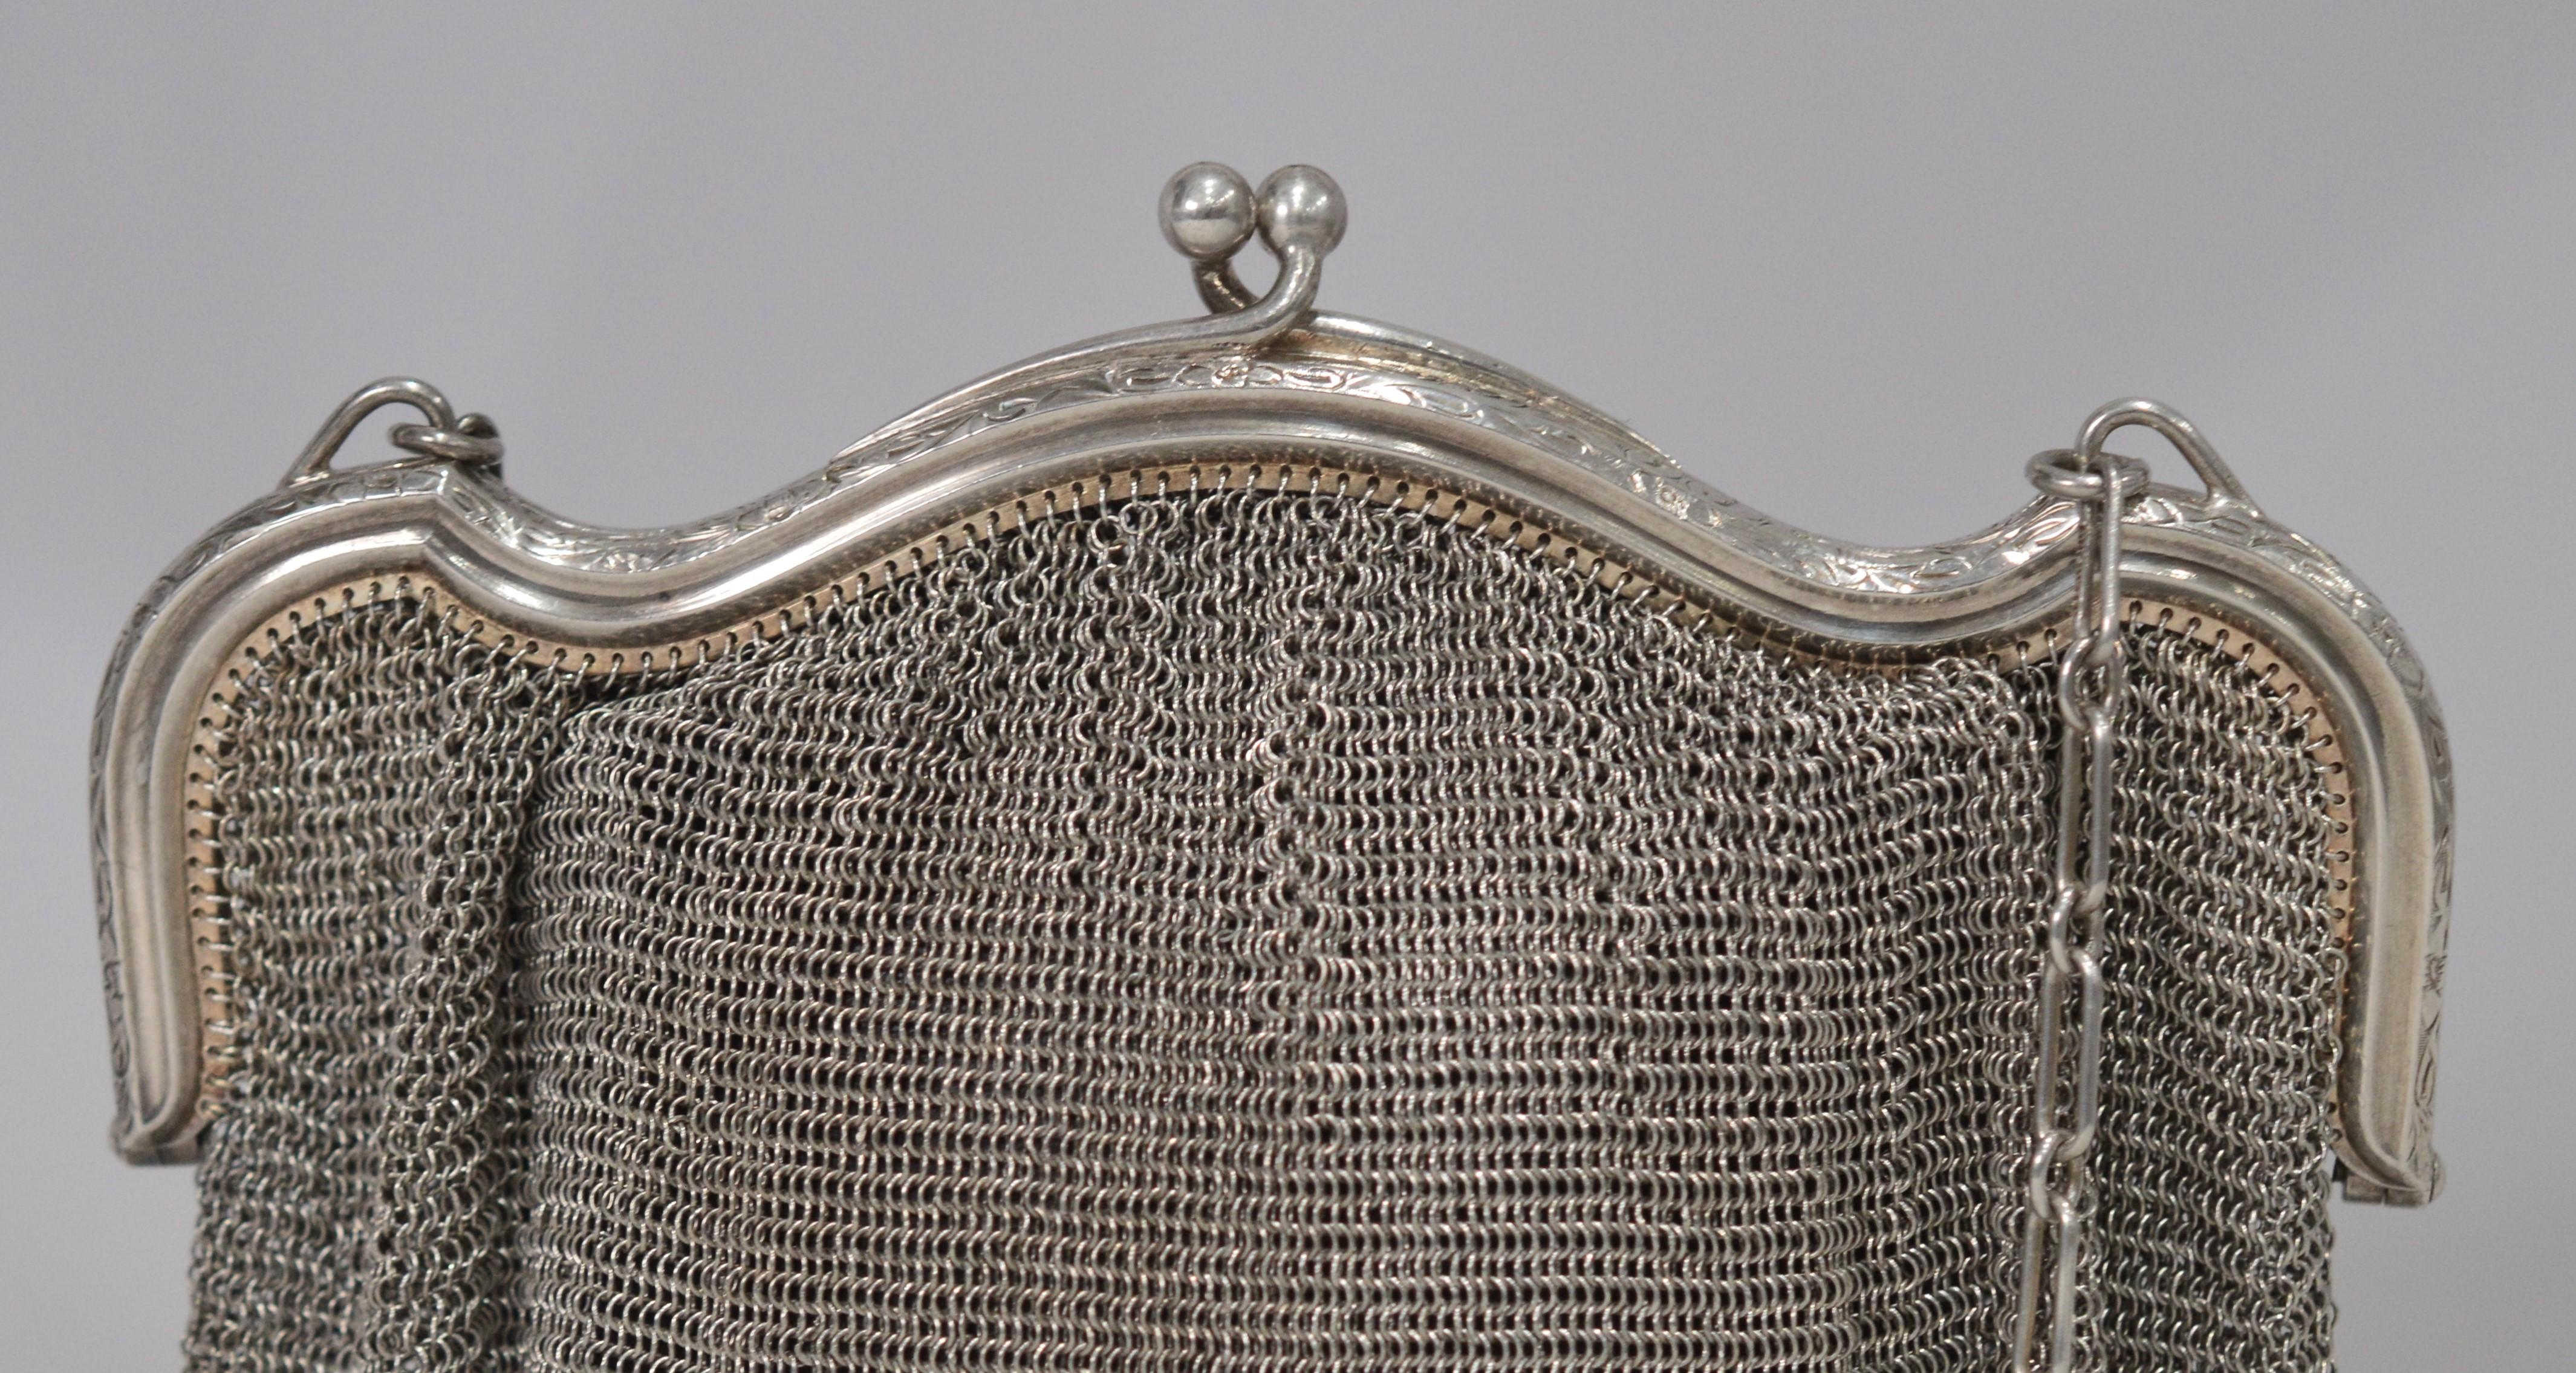 Circa 1900, this Edwardian style sterling silver antique purse by Louis Stern & Co. is a great additional to any personal collection and is a unique evening bag for that special occasion. In excellent usable condition with a beautifully etched